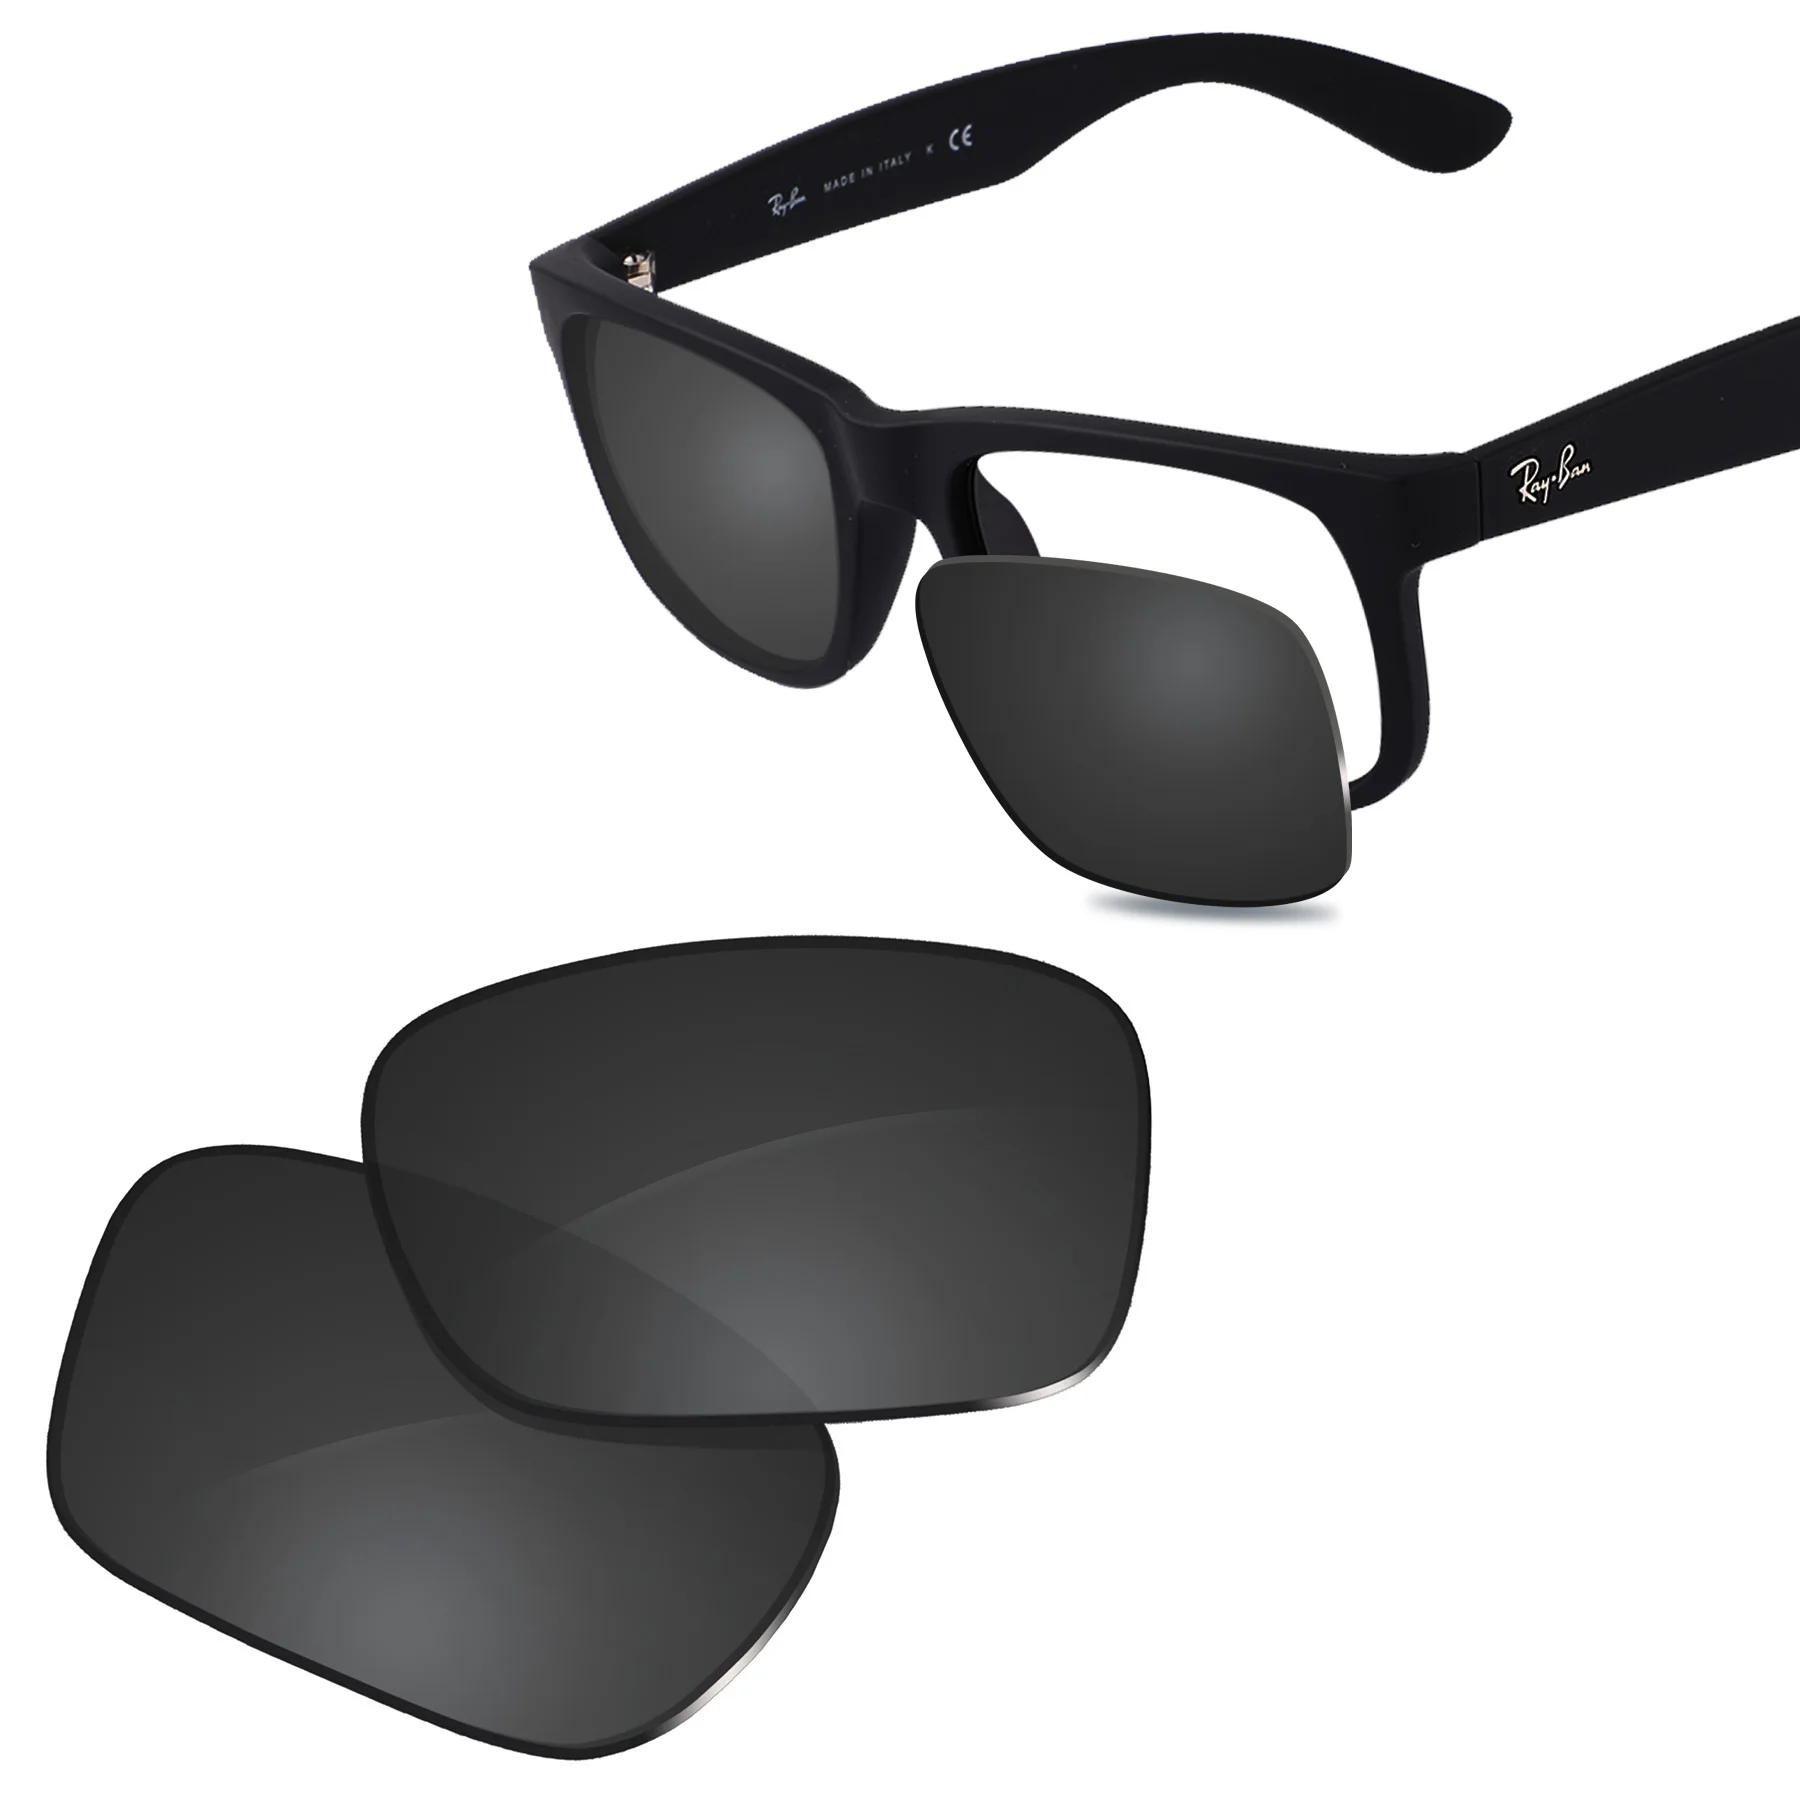 New Sunglasses with Interchangeable lenses. 